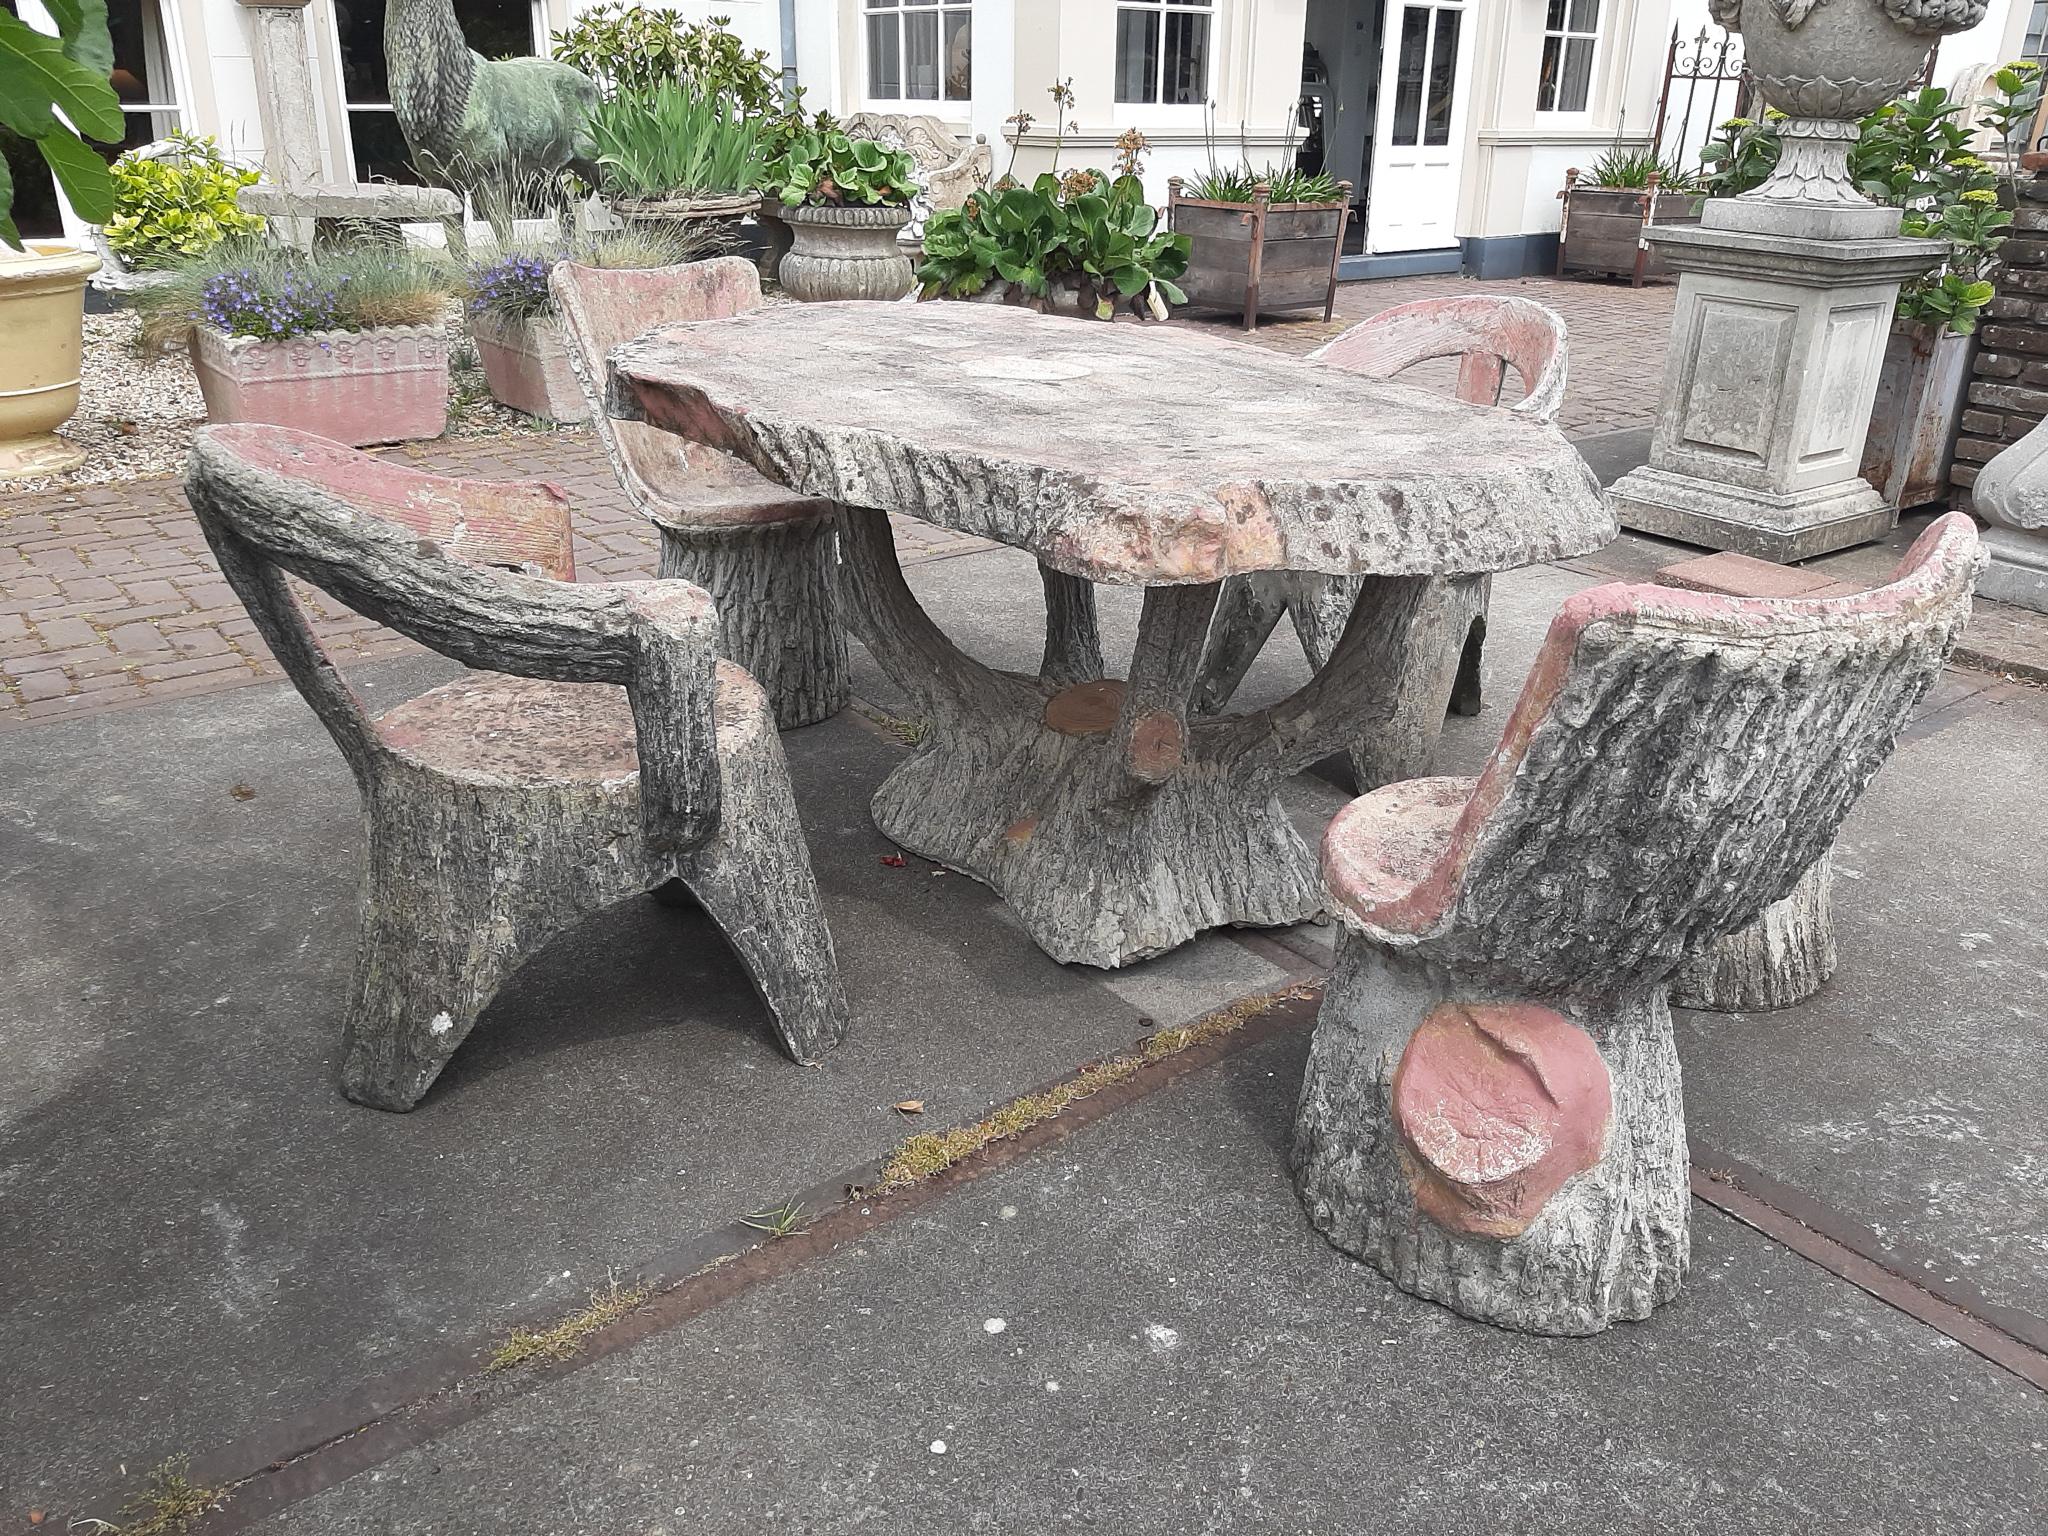 A midcentury faux bois stone garden table and chairs. Faux Bois (false wood) refers to the artistic imitation of wood and wood grains in various media. This rustic concrete garden set is composed of four chairs (of which two have armrests) a stool